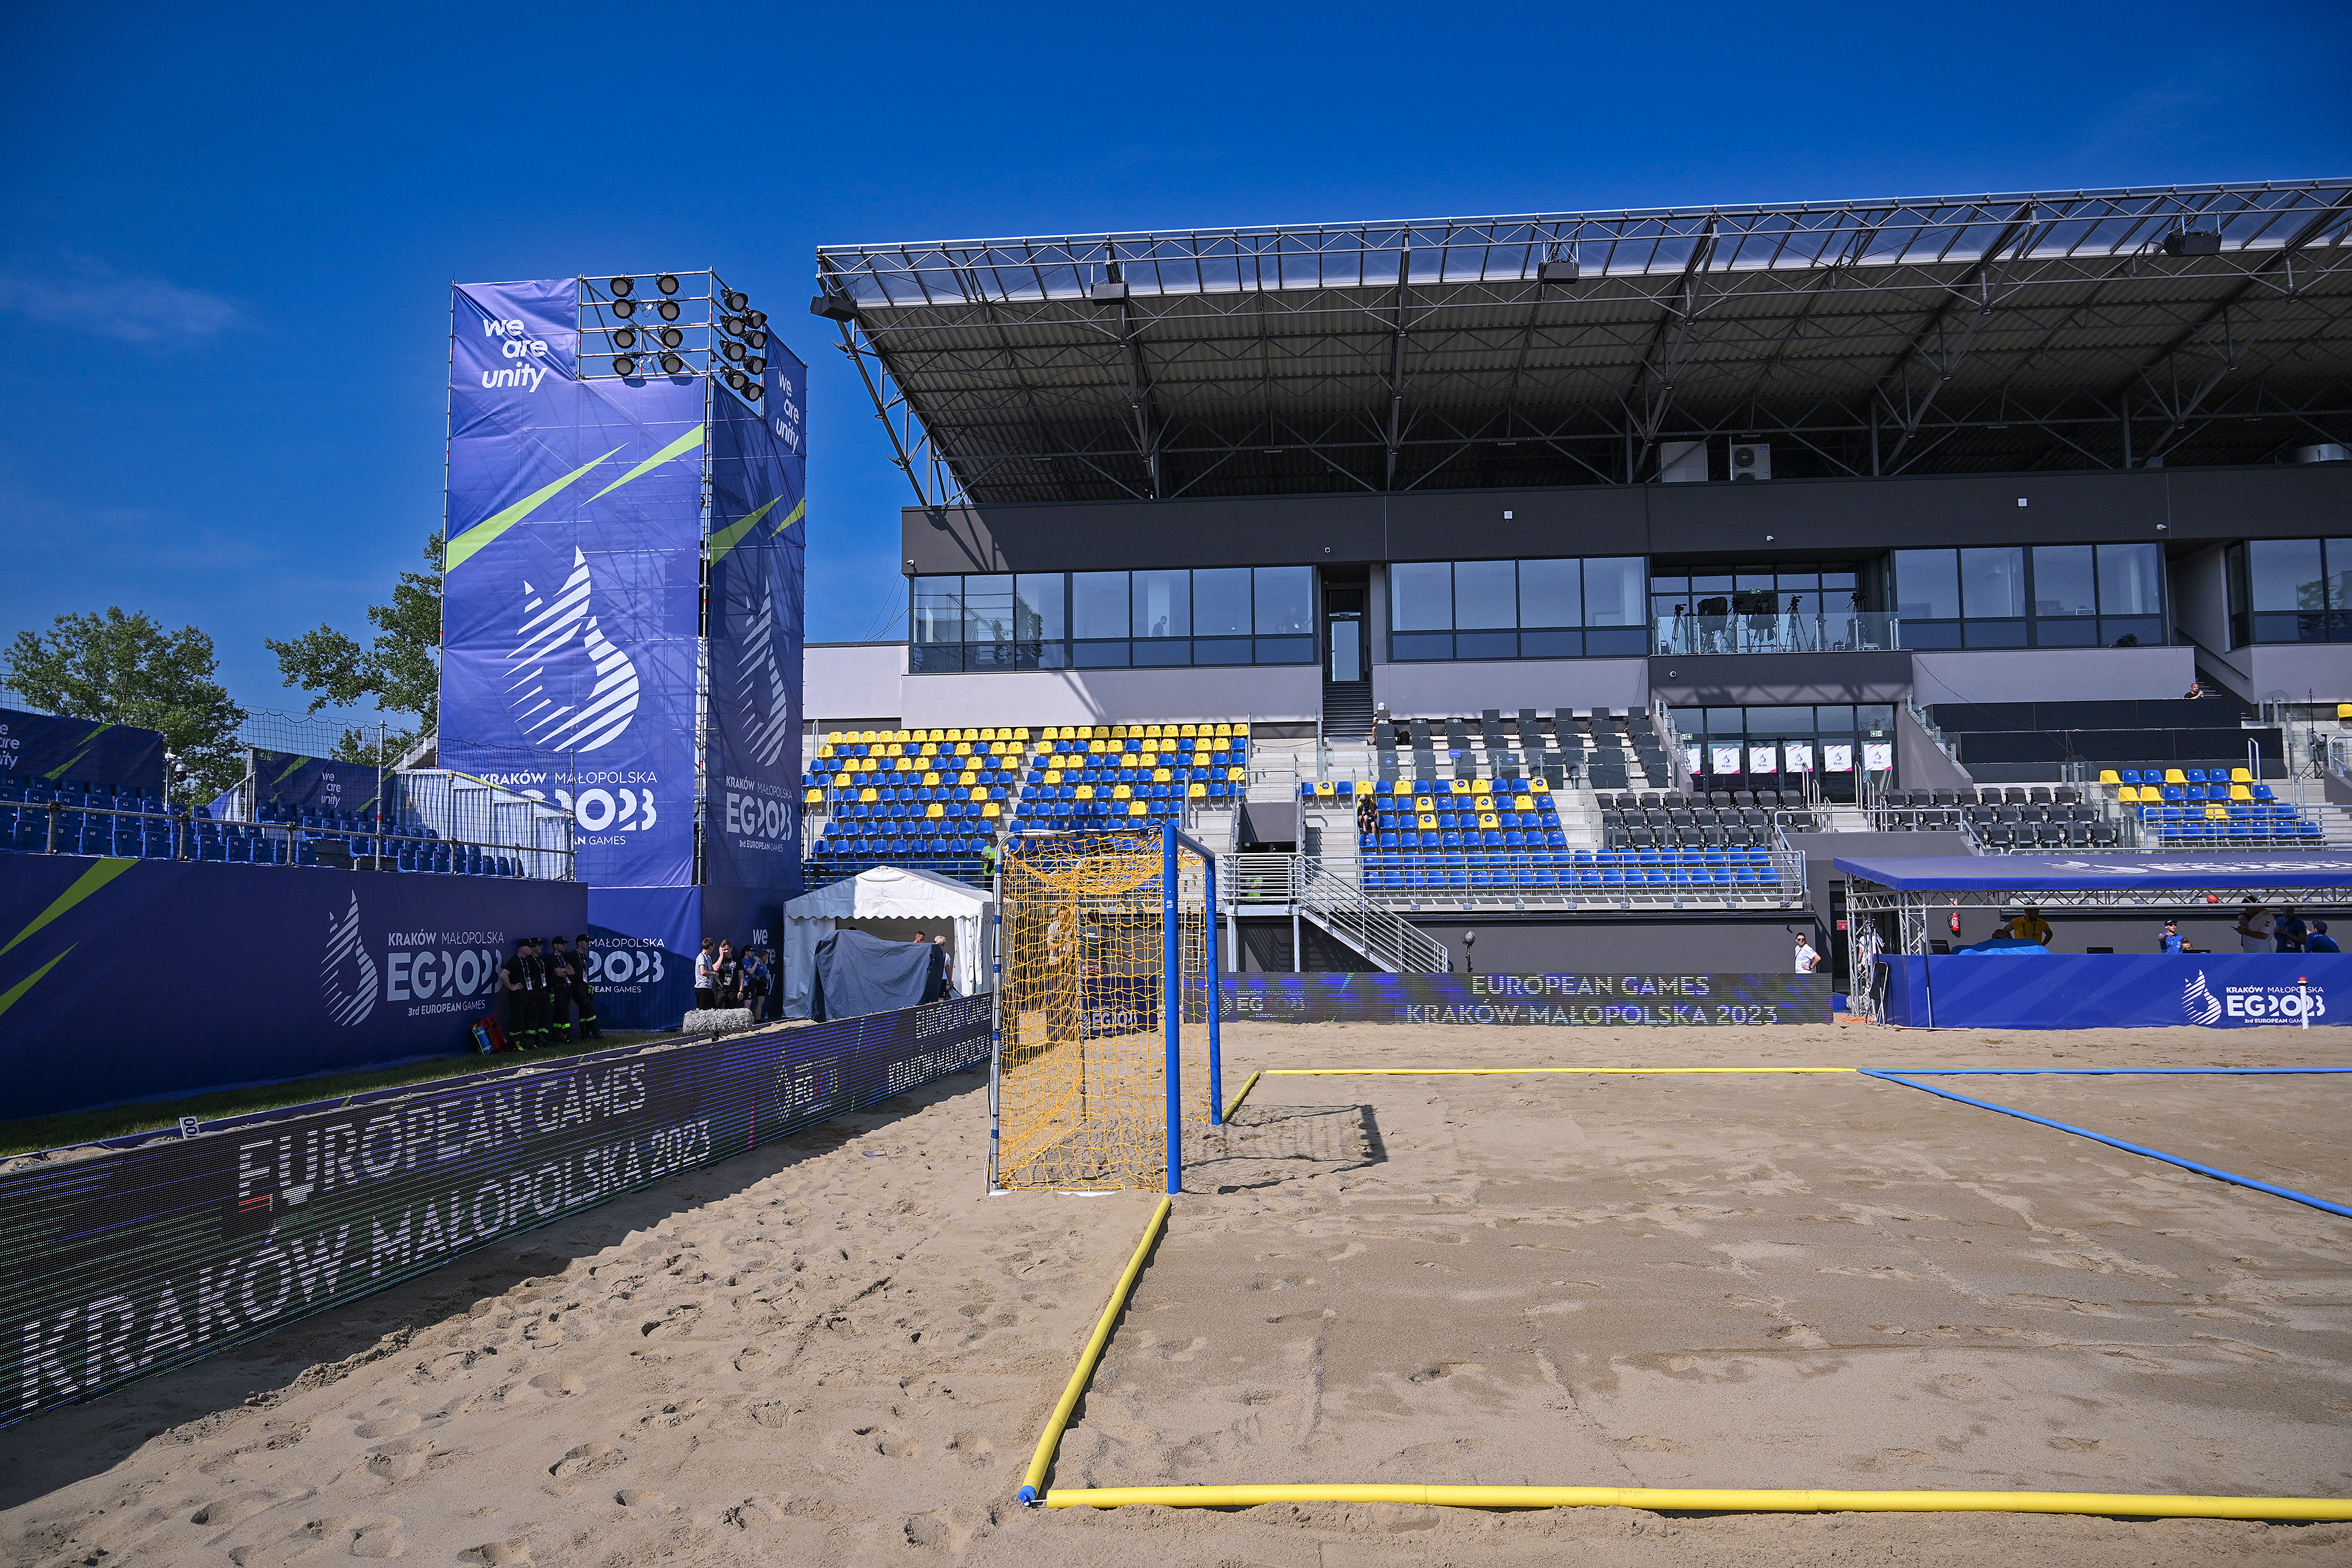 Change of quarter-final pairs in beach handball after Norway’s protest